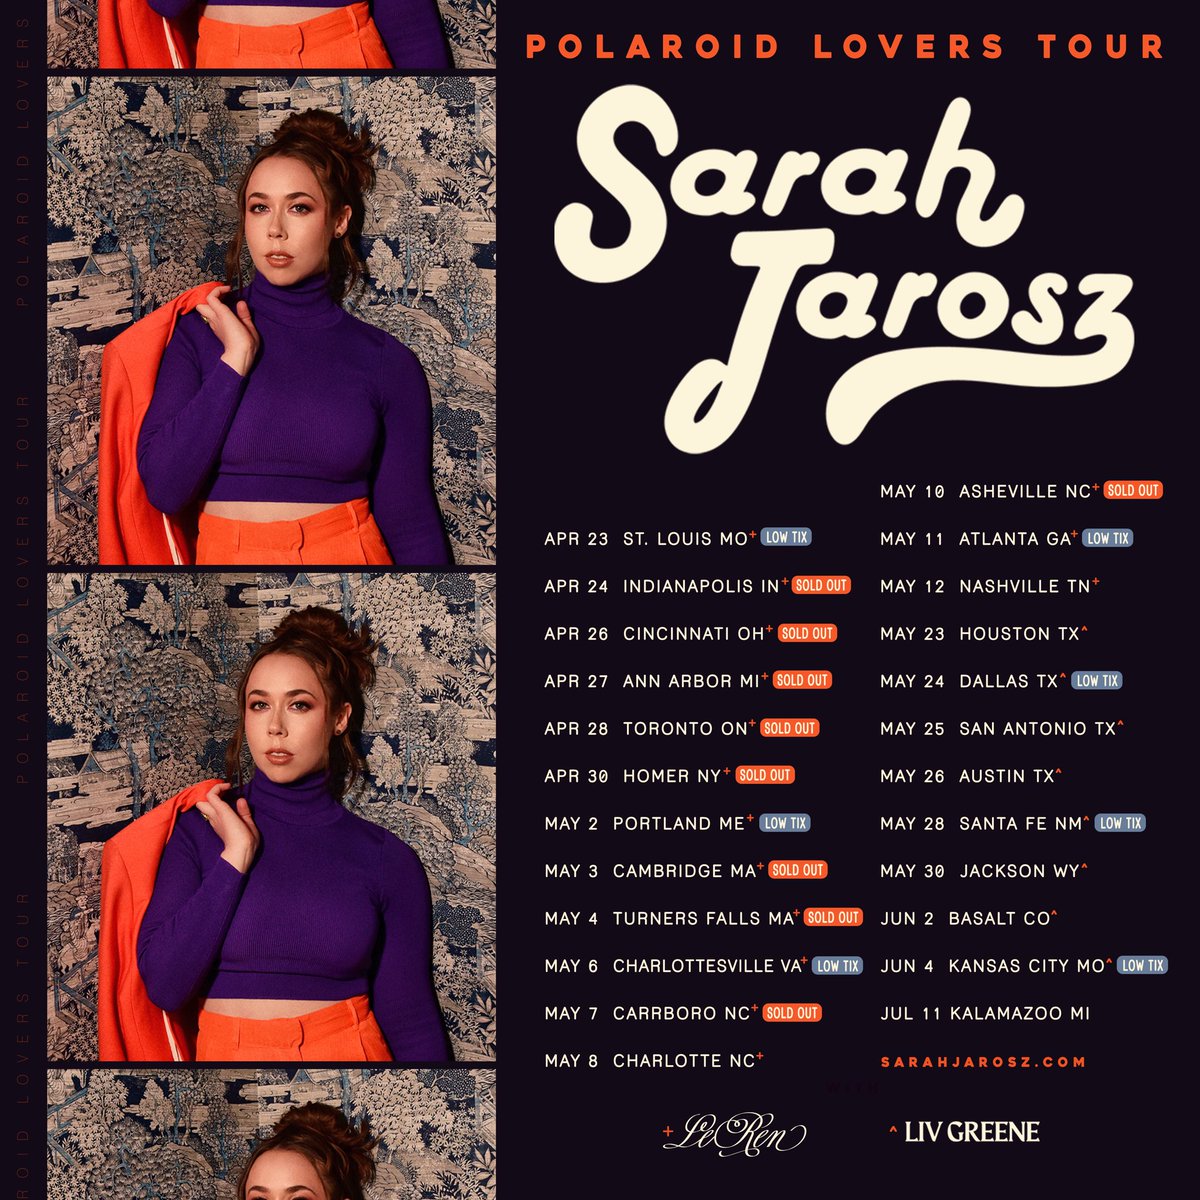 Polaroid Lovers Tour picks back up in a few weeks! Tickets are going fast so head over to sarahjarosz.com to grab yours. Thanks to all of you for continuing to make this album release tour so special 🧡